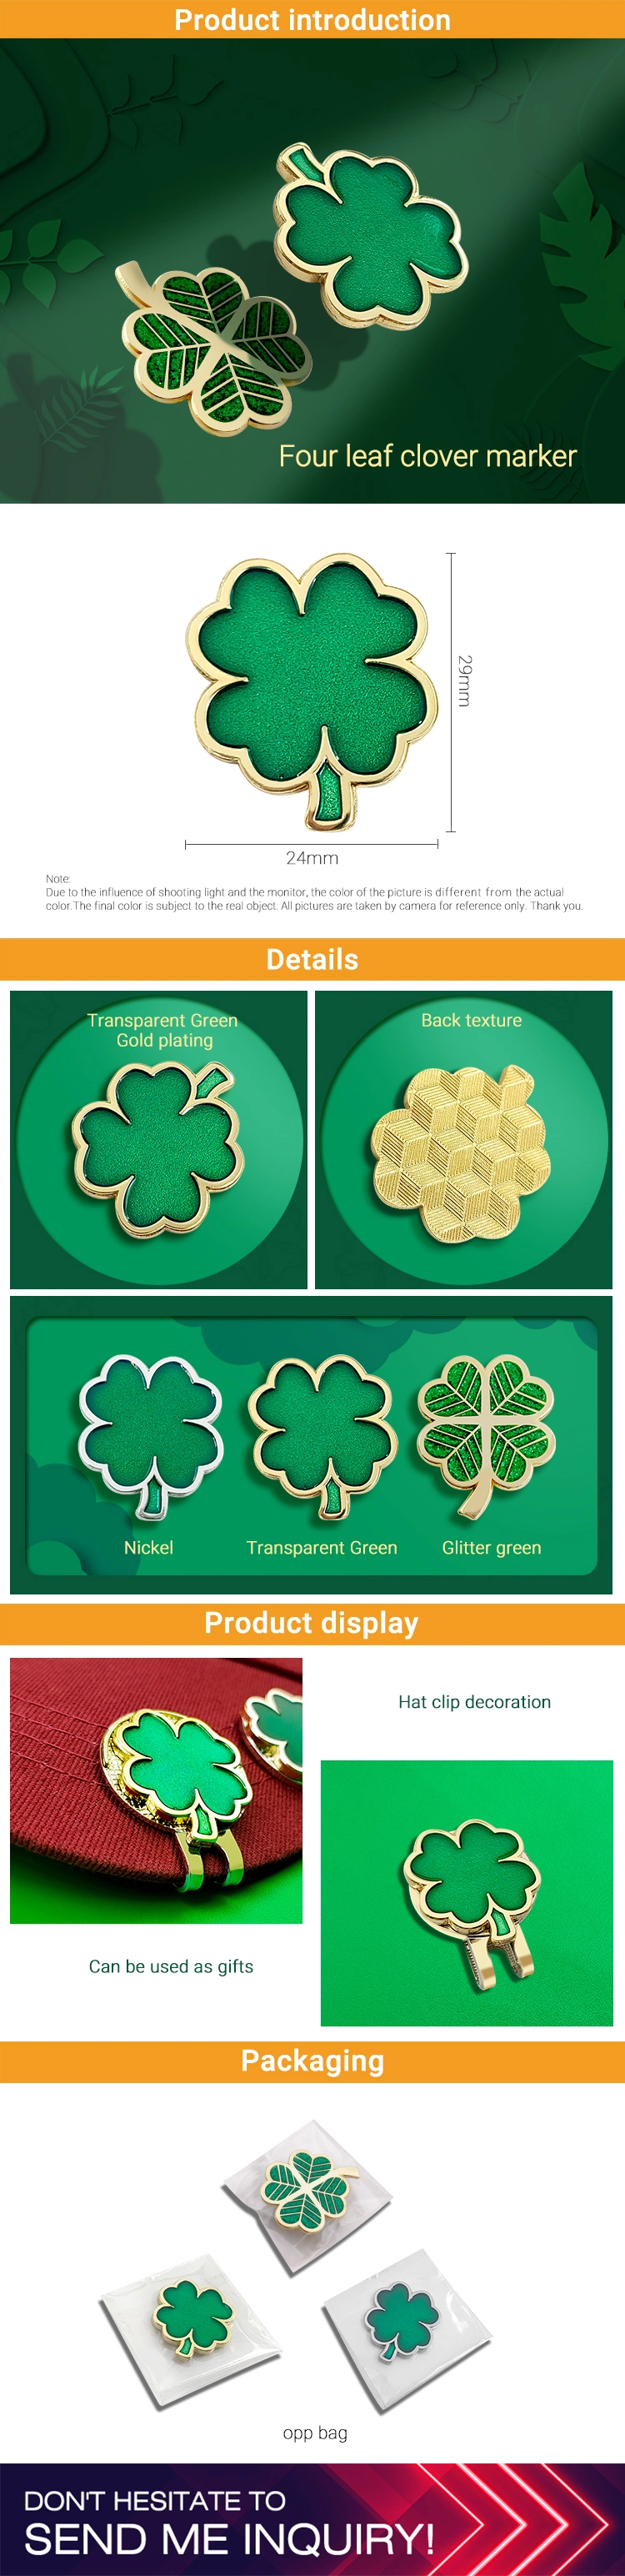 25mm Metal Four Leaf Clover Gold and Onion Powder Golf Ball Marker